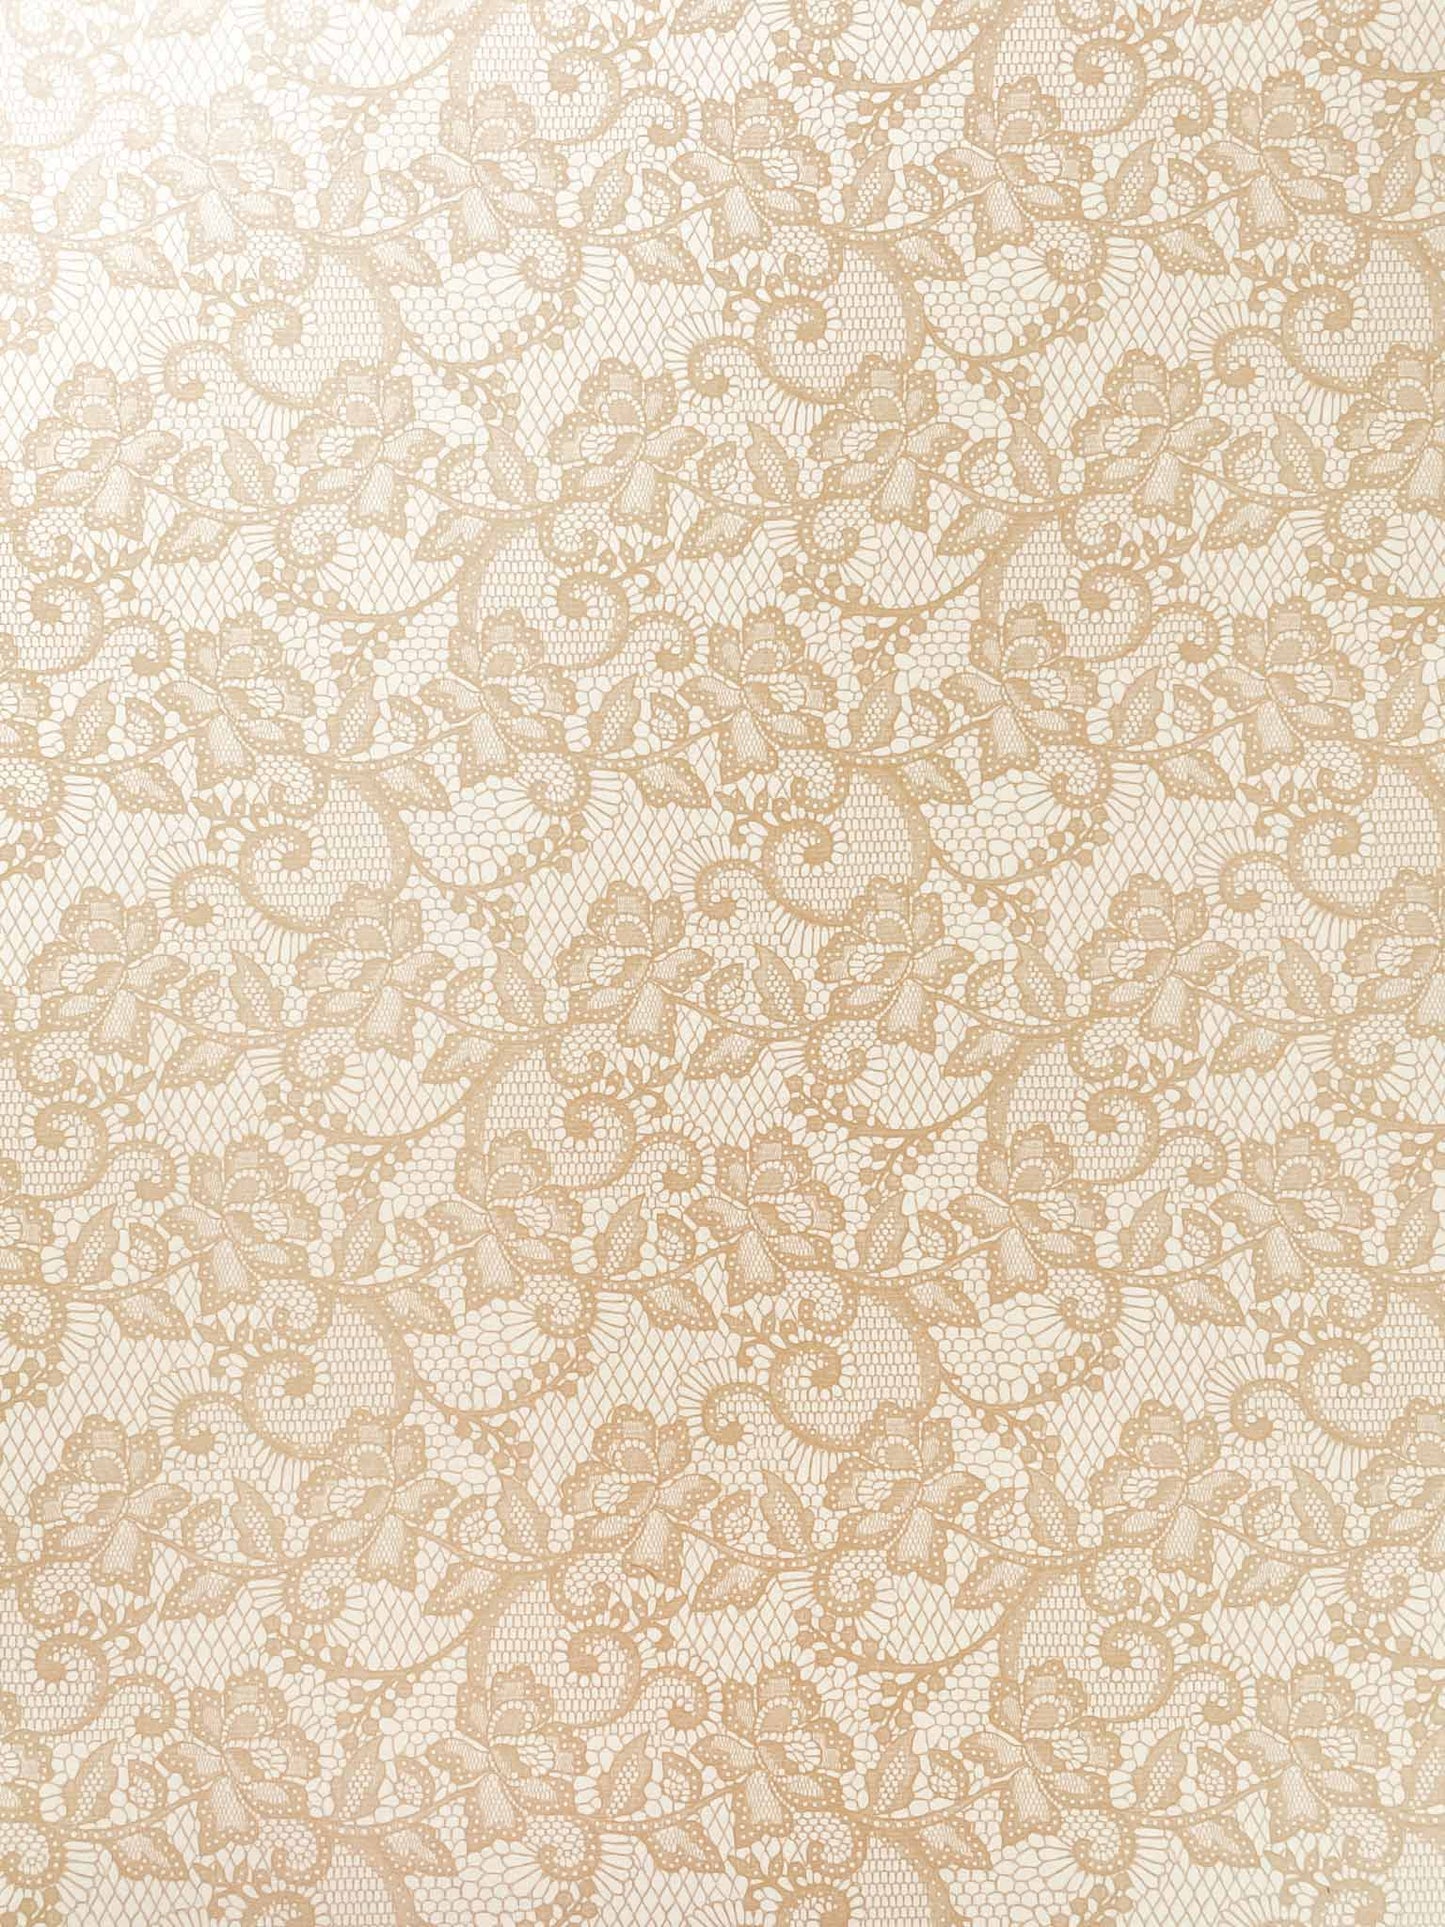 beige-and-white-lace-pattern-paper